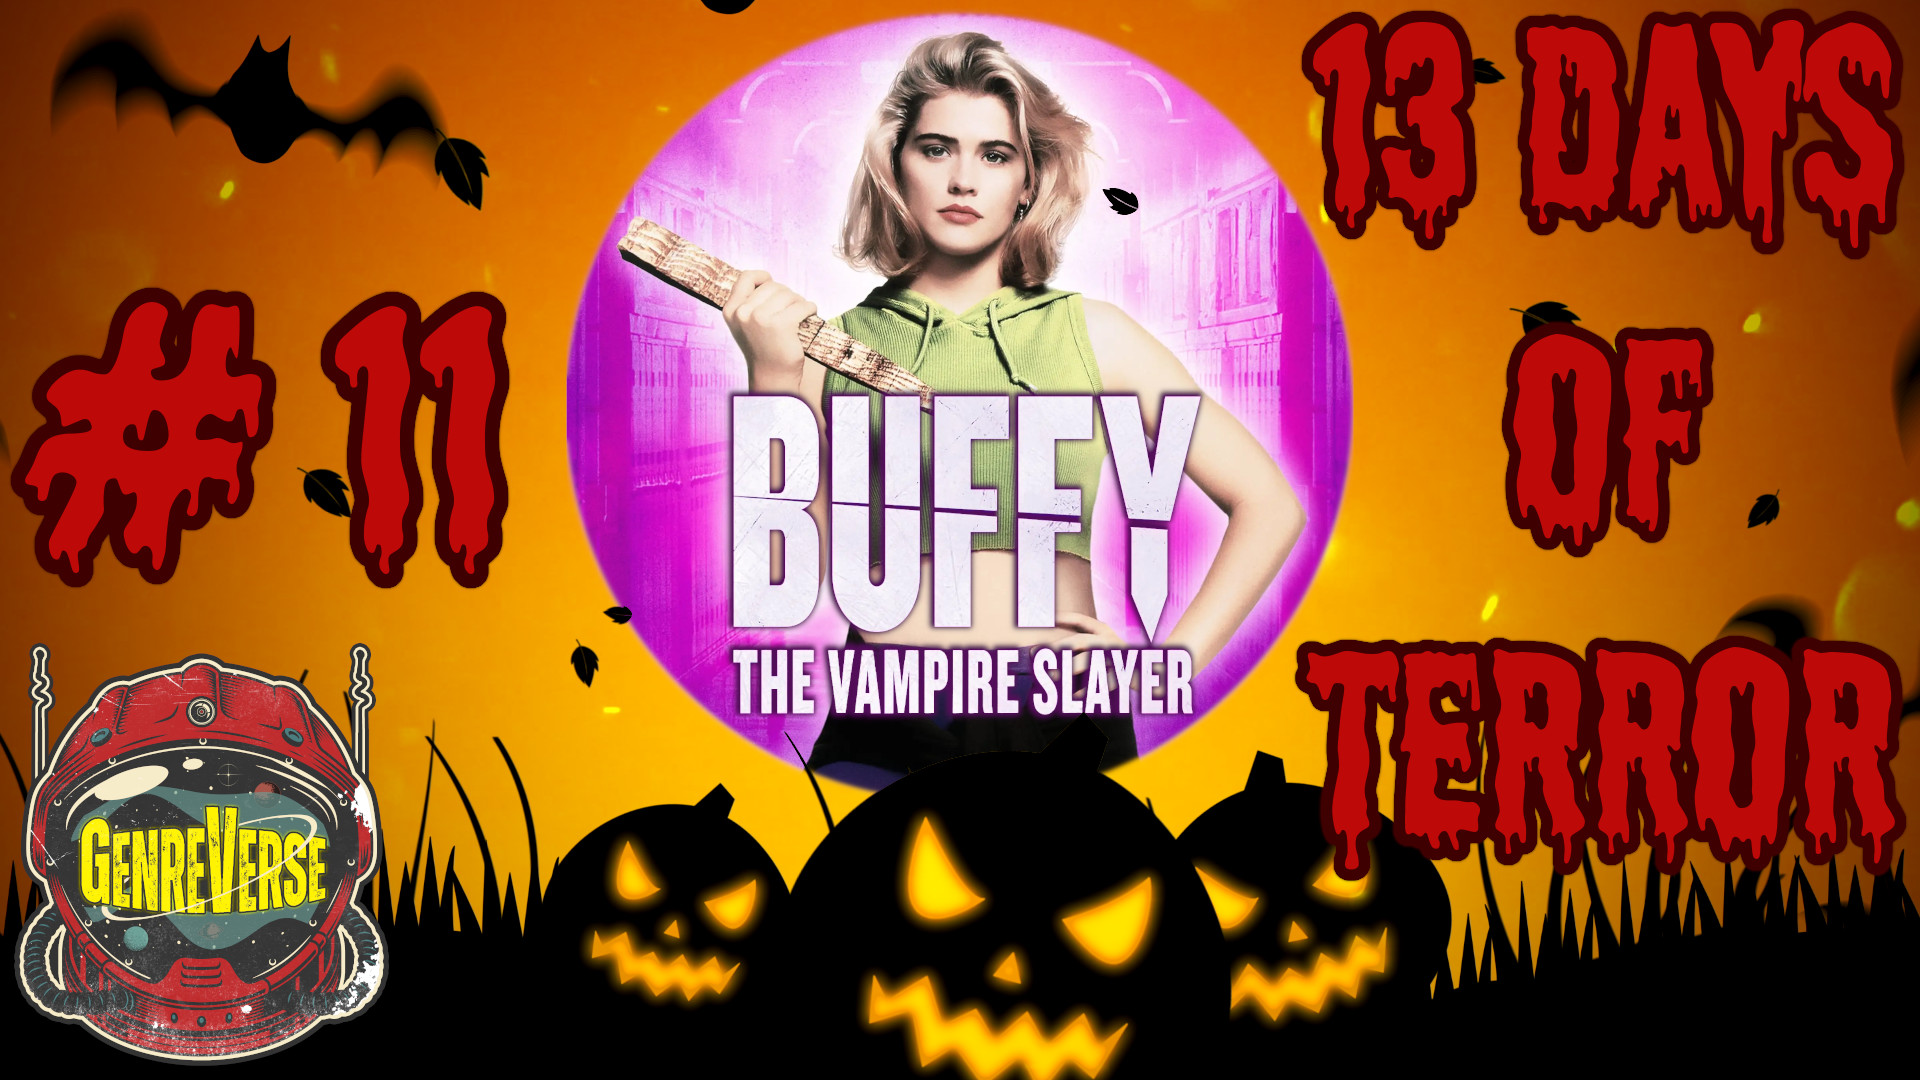 Buffy The Vampire Slayer Review: It Like, Totally Rules! | GV’s 13 Days Of Terror